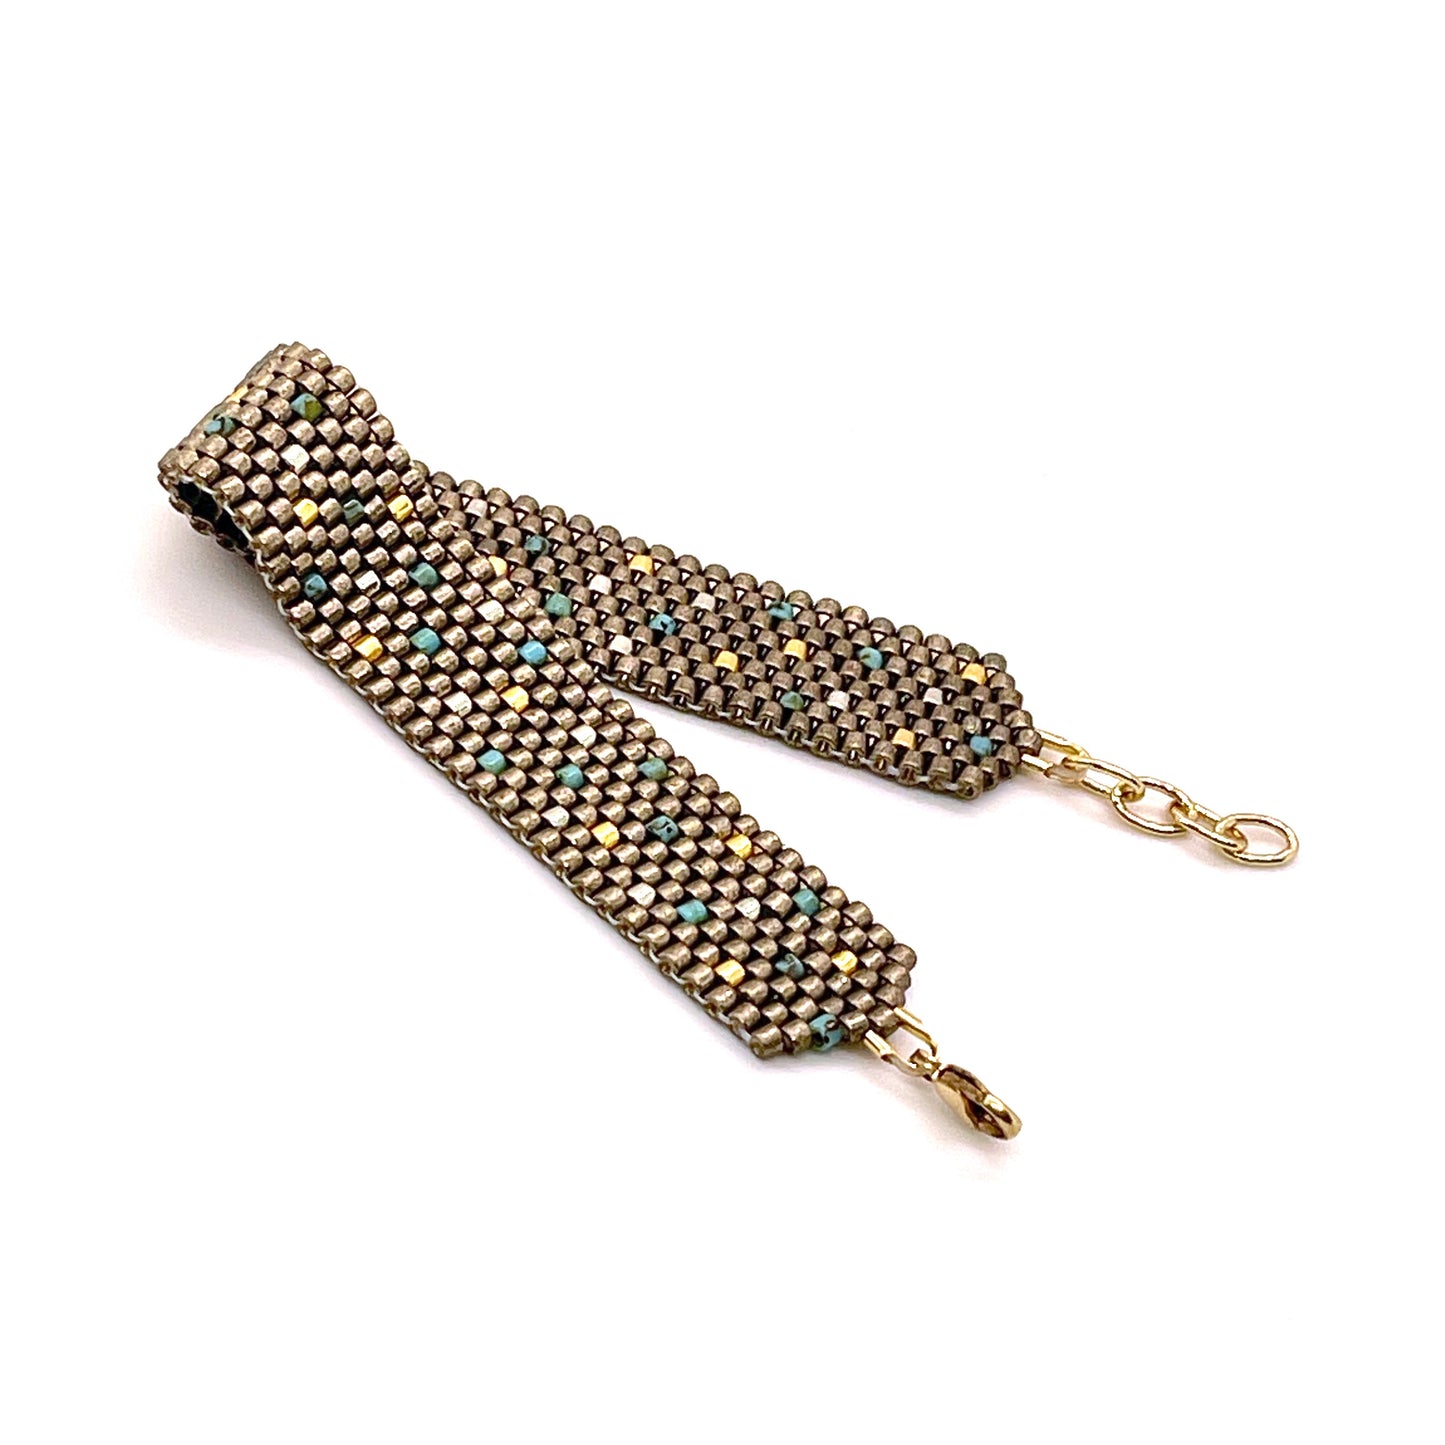 Bronze pewter handwoven seed bead bracelet with turquoise and gold beads sprinkled throughout.